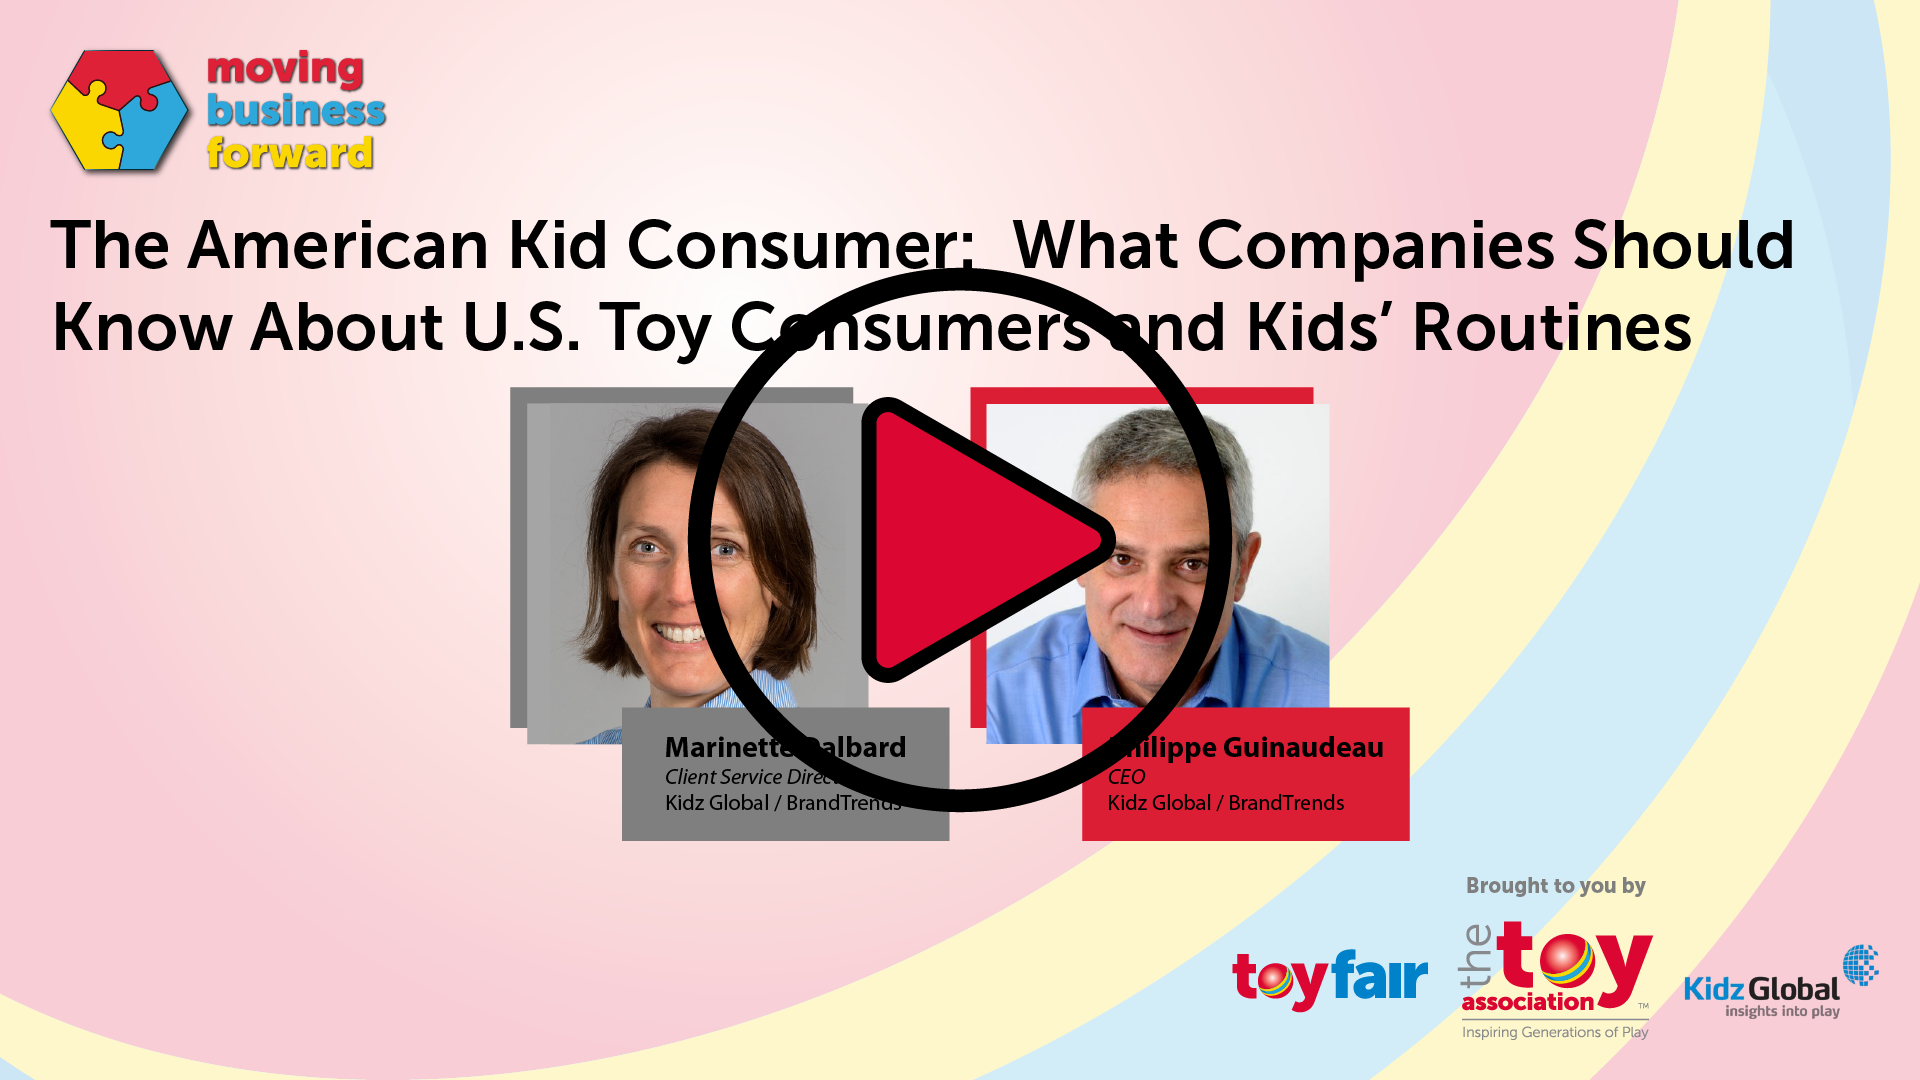 The American Kid Consumer: what companies should know about U.S. toy consumers and kids’ routines